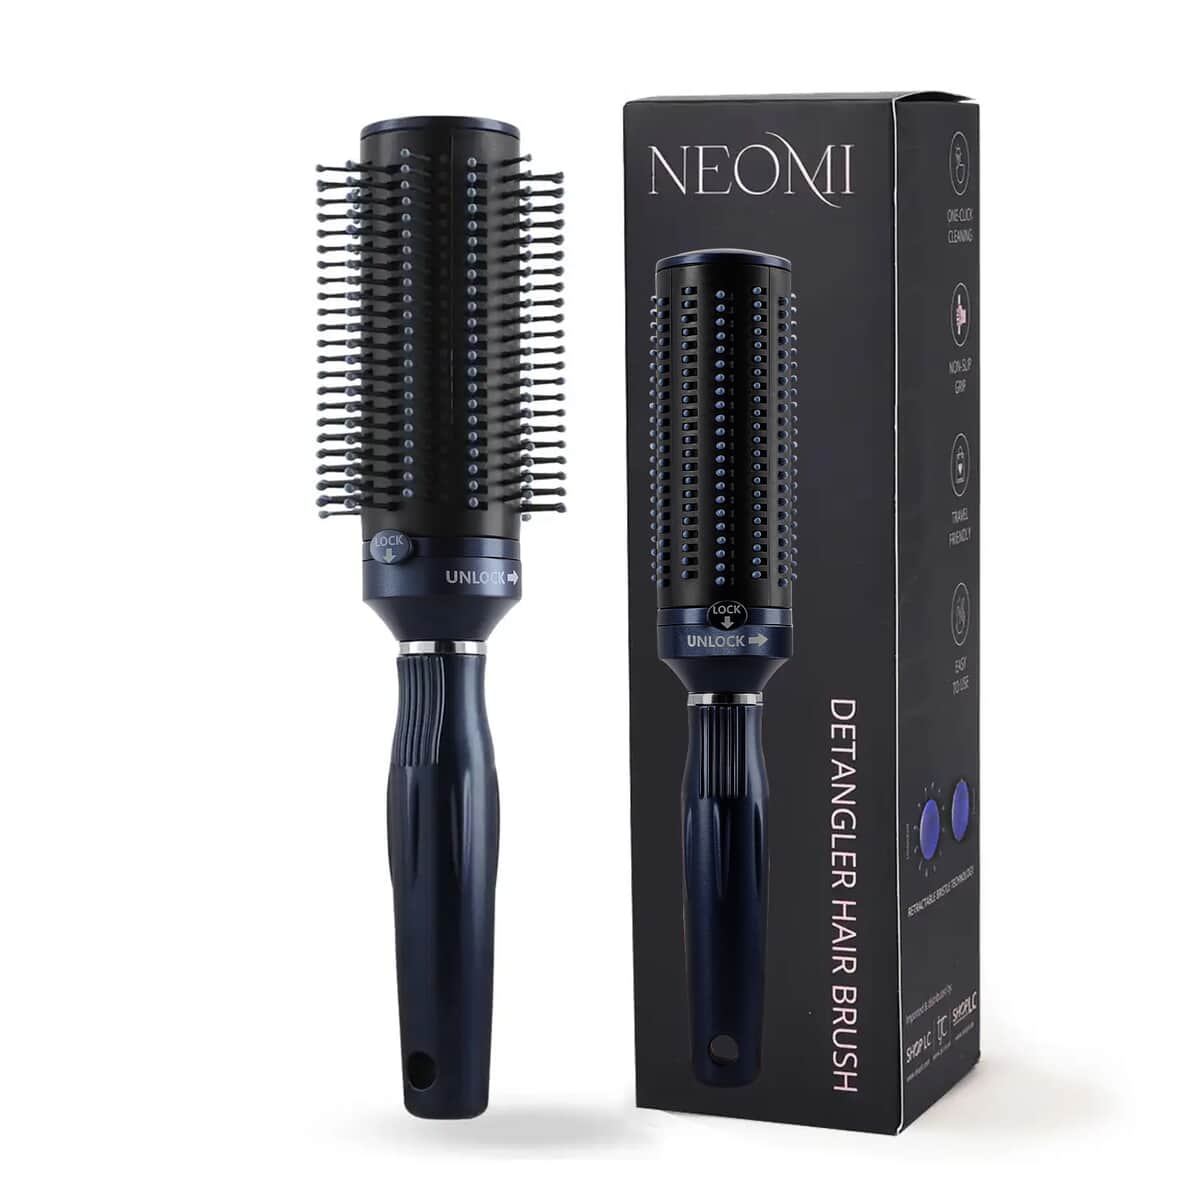 Neomi Detangler Hair Brush With Retractable Bristle Technology, Quick Clean Hair Comb For Loosening and Detangling - Navy (Patent Pending) (Del. in 7-10 Days) image number 0